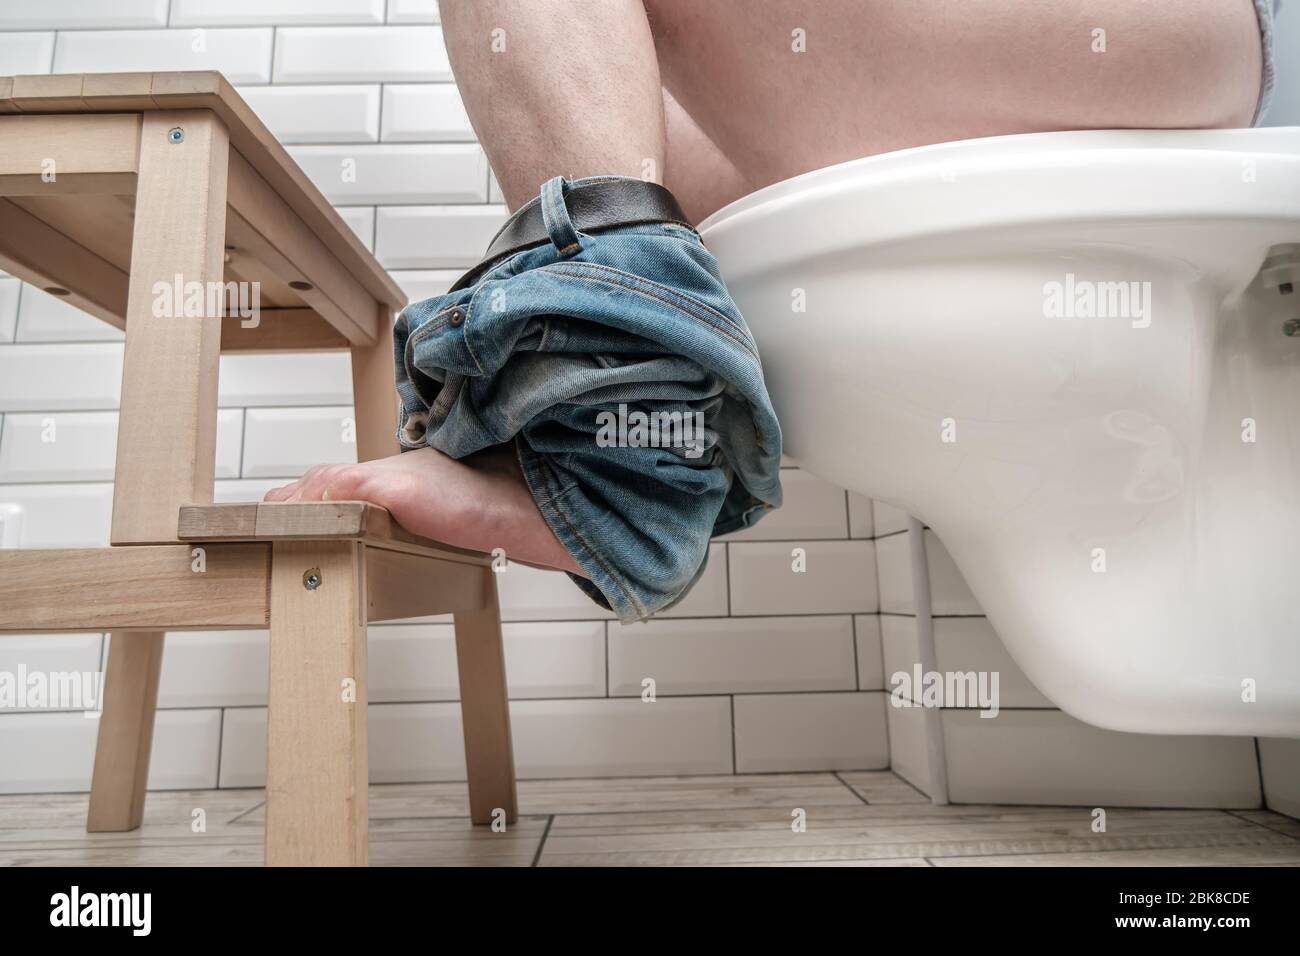 Man sitting on toilet bowl properly, he put feet on a small stool in a squatting position, during the defecation. Health concept. Stock Photo